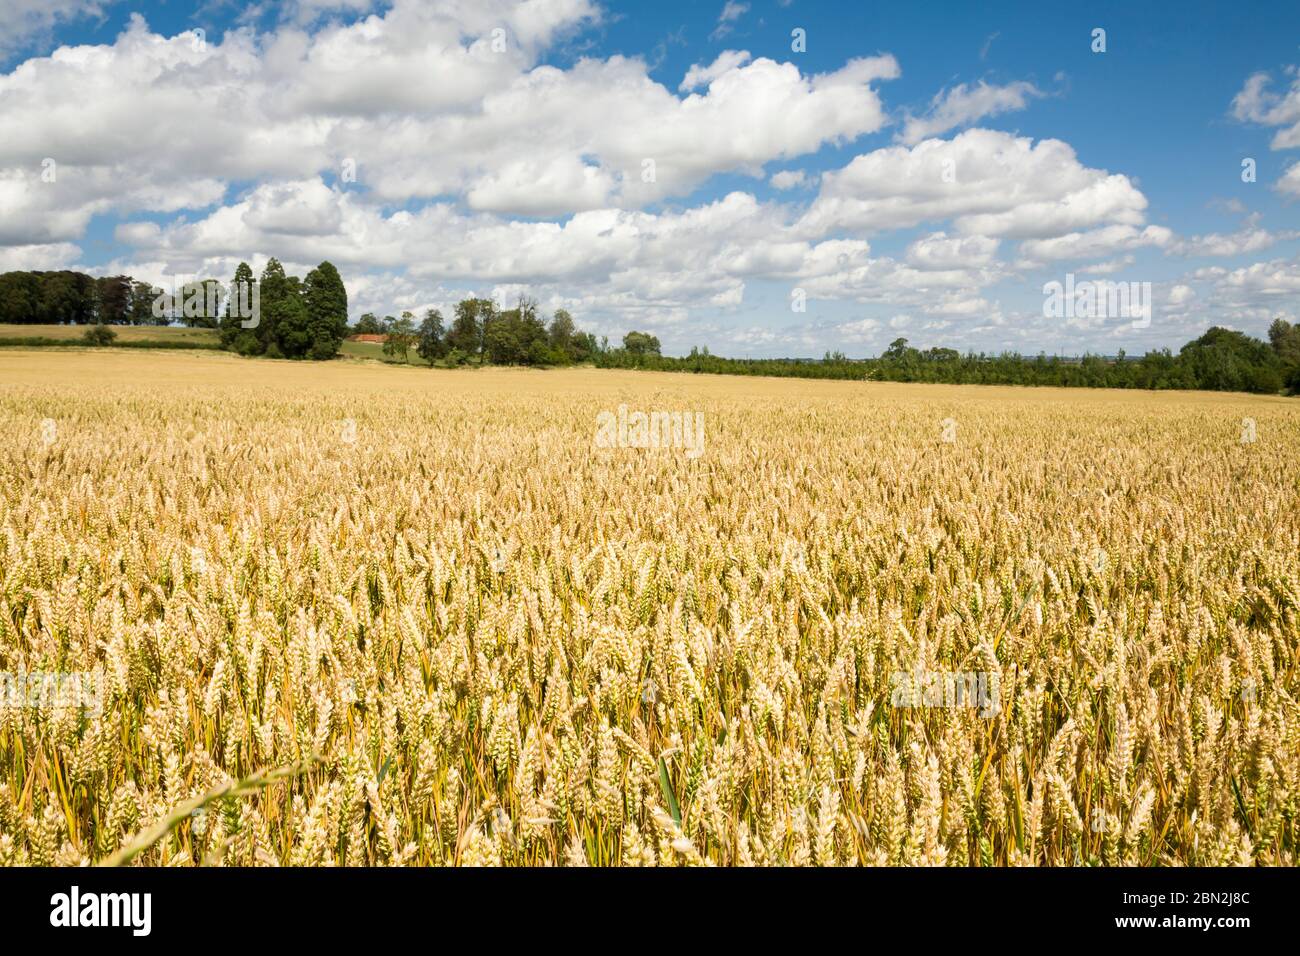 Fields of golden wheat, cereal crops in UK farmland Stock Photo